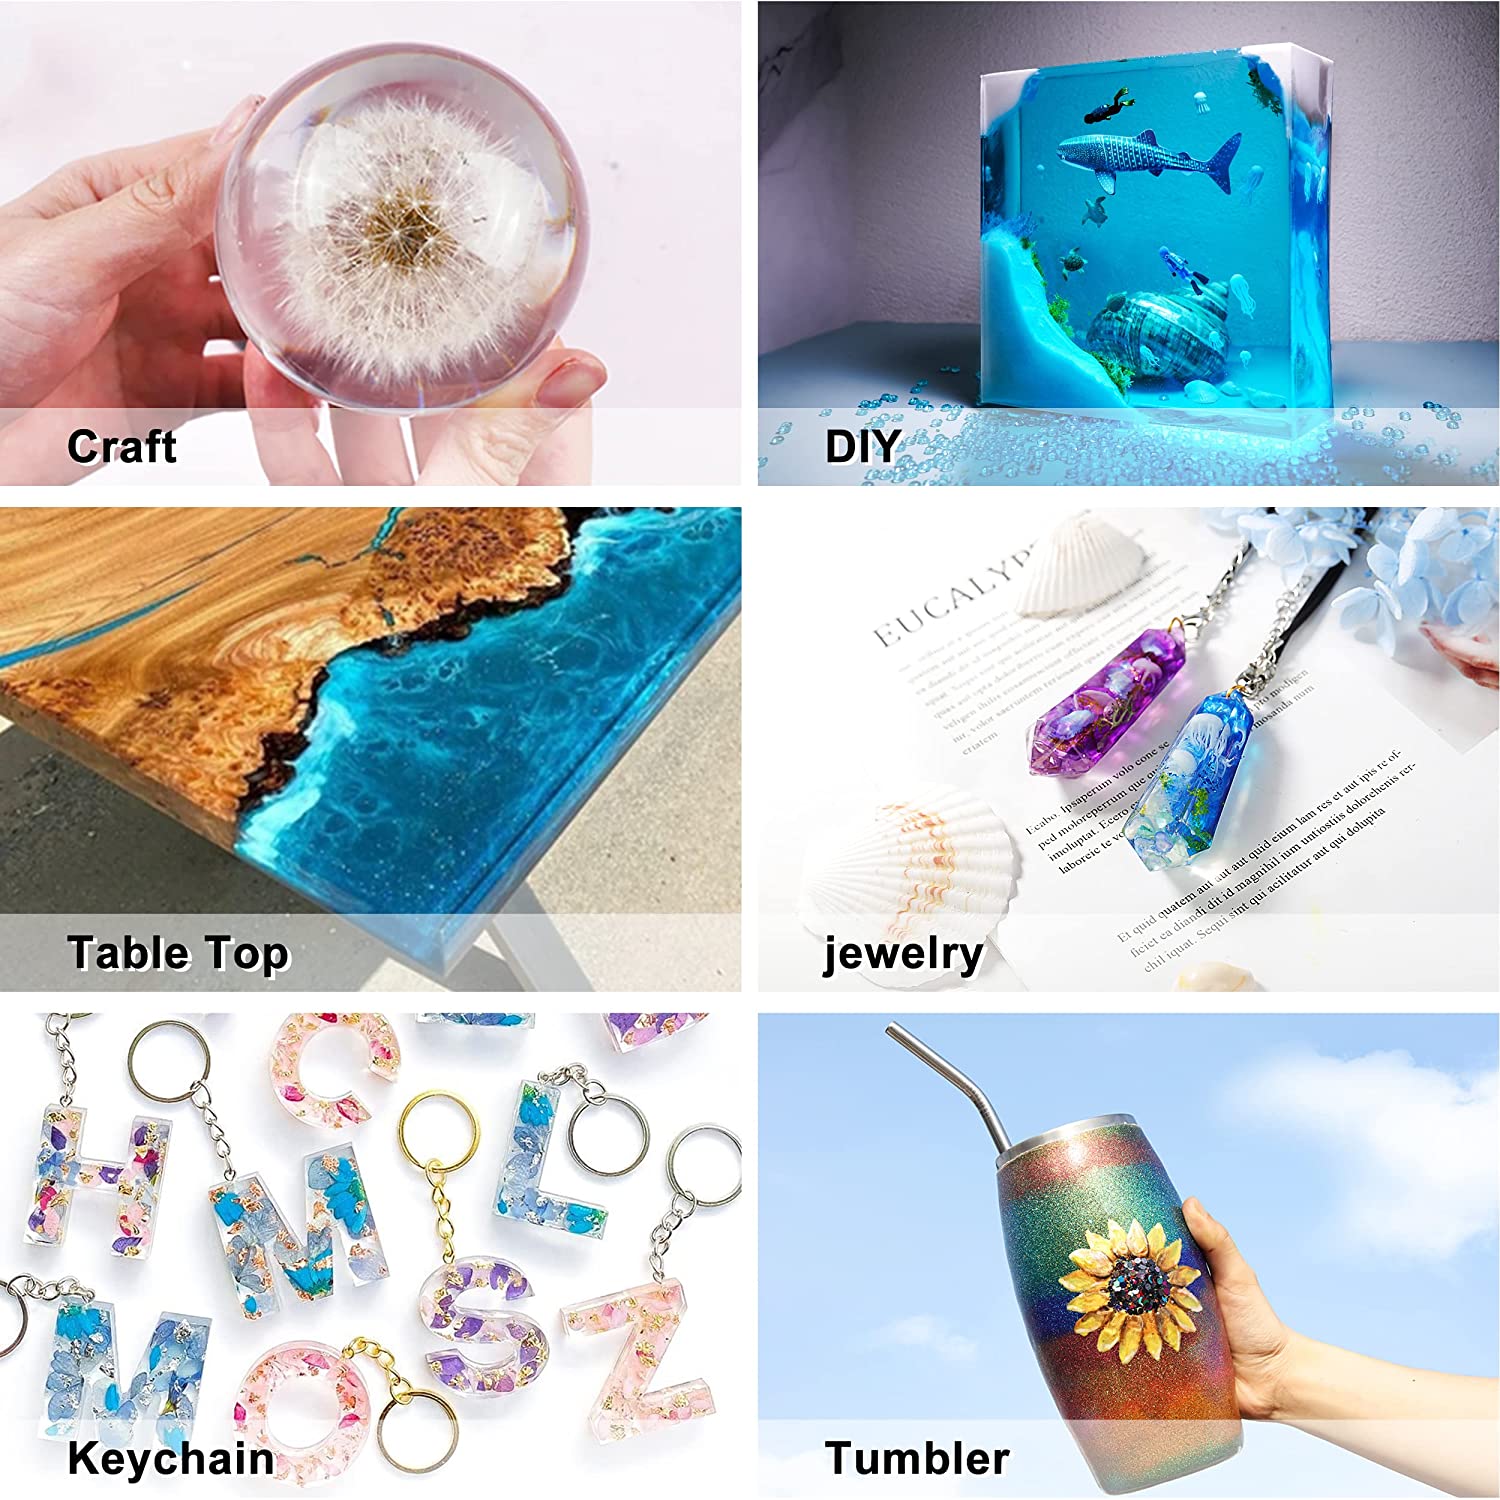 Let's Resin Crystal Clear Epoxy Resin, 32oz Bubbles Free Epoxy Resin, Table Top & Bar Top Casting Resin, Clear Epoxy Resin for Art Crafts